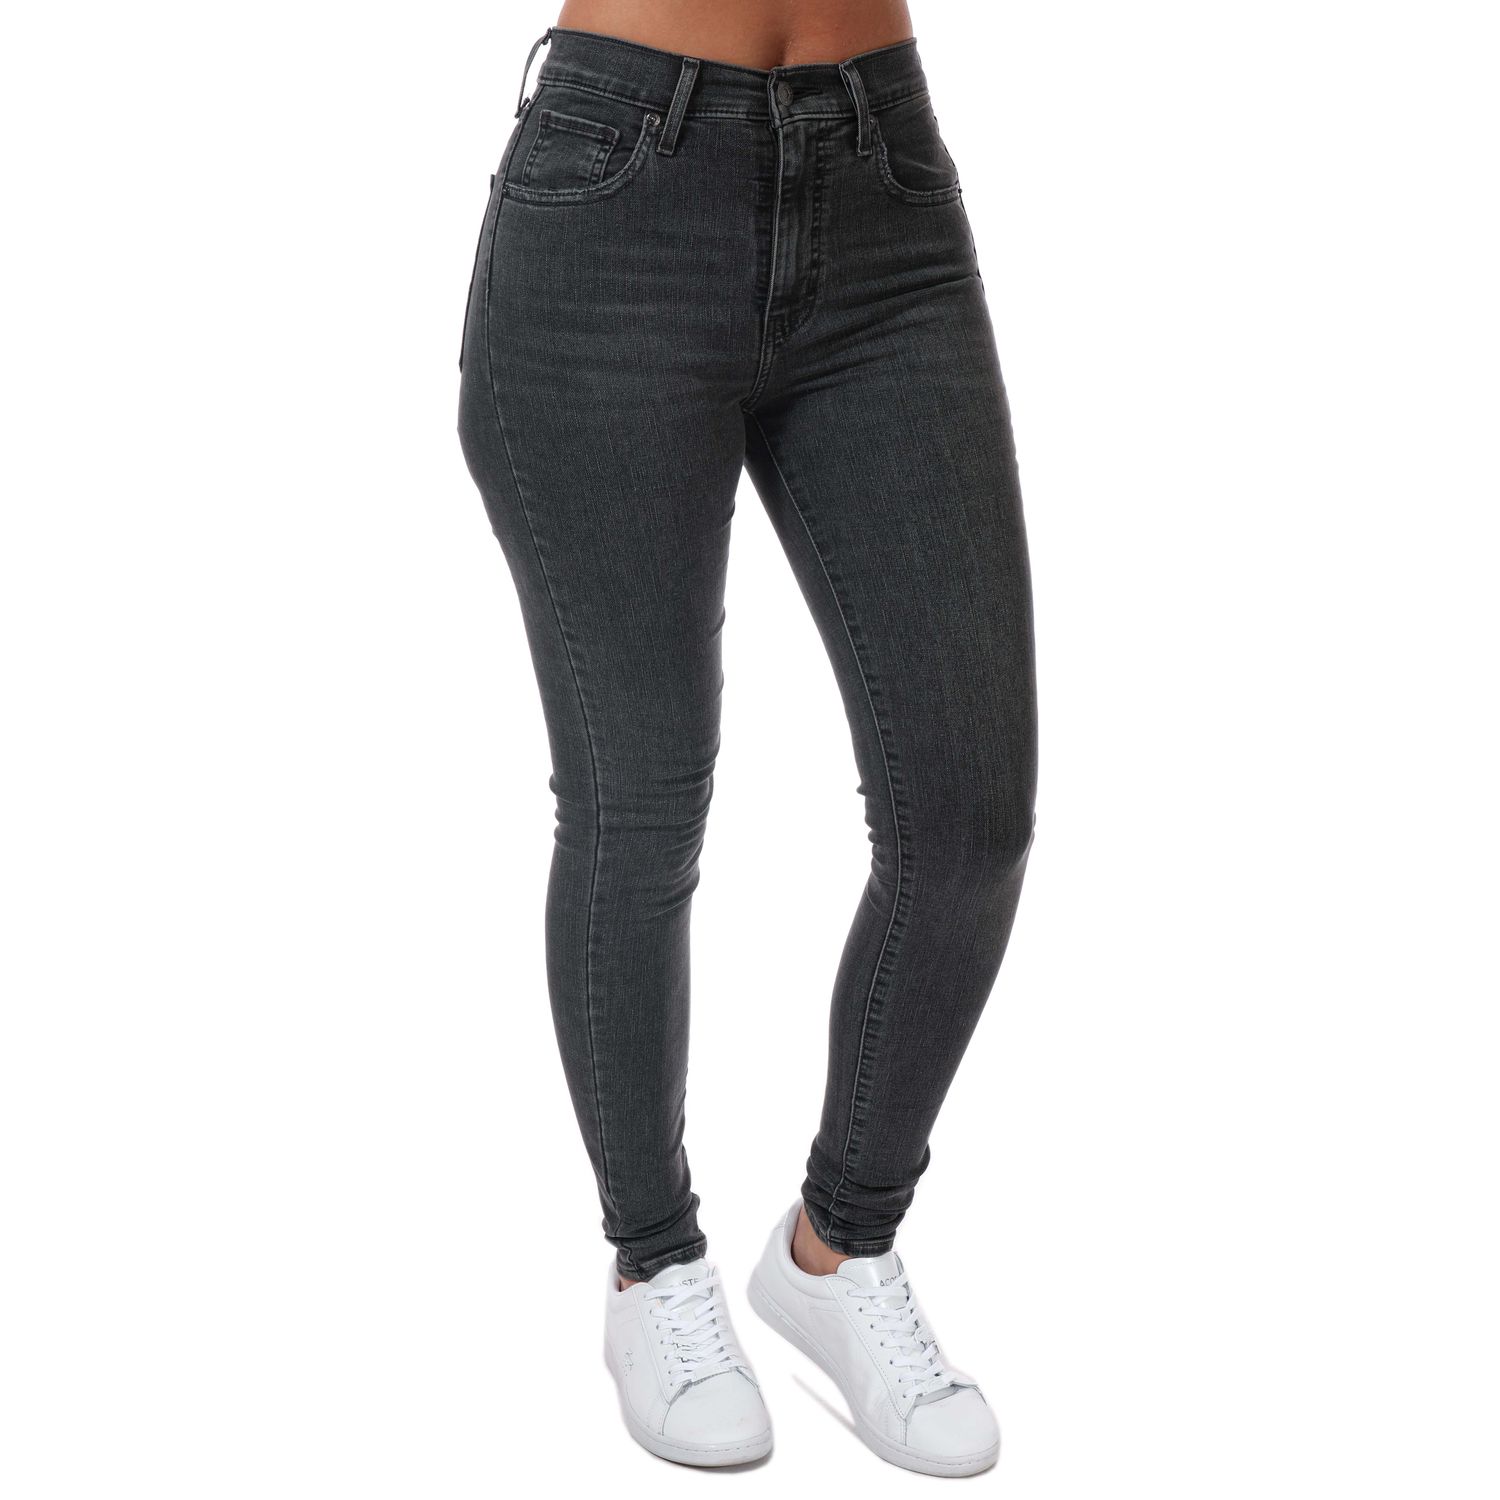 Women's Mile High Jeans